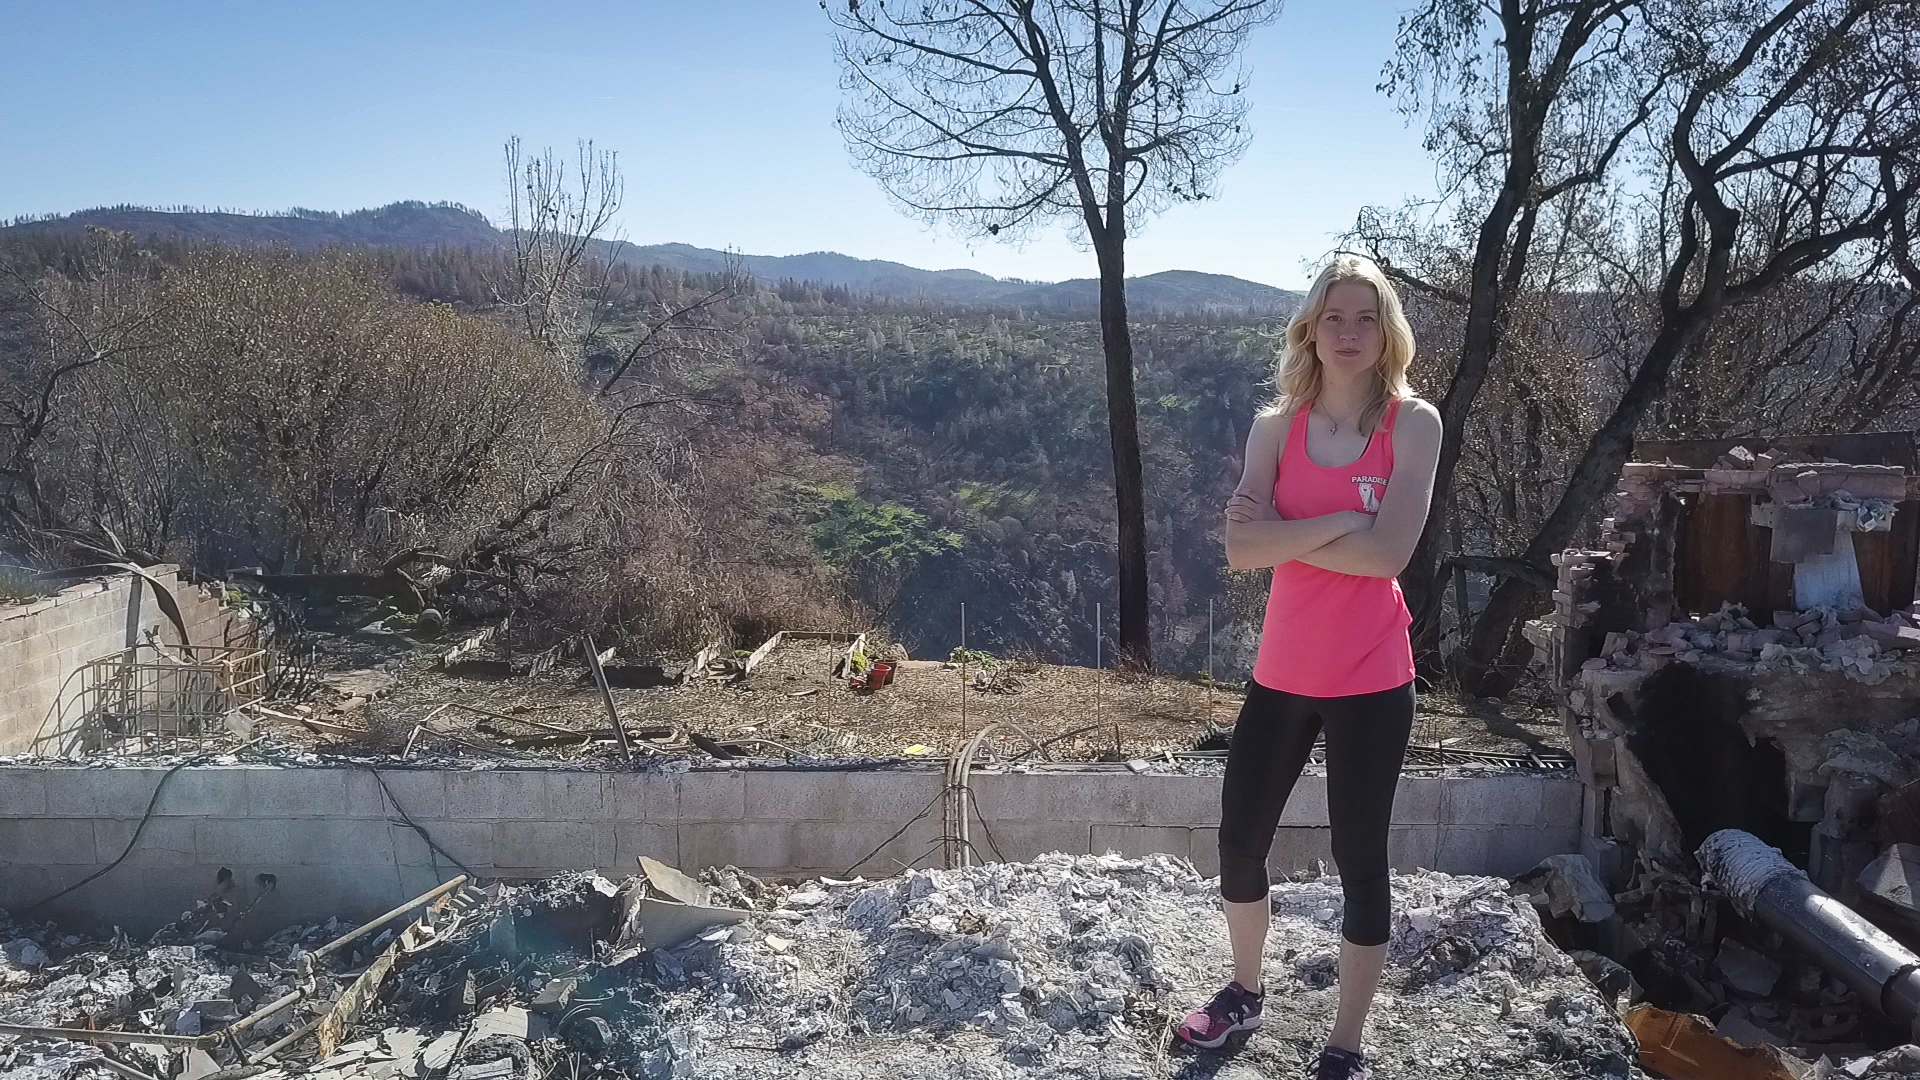 Wearing workout clothes, Cheyenne stands with her arms crossed in the ashes of her family home.